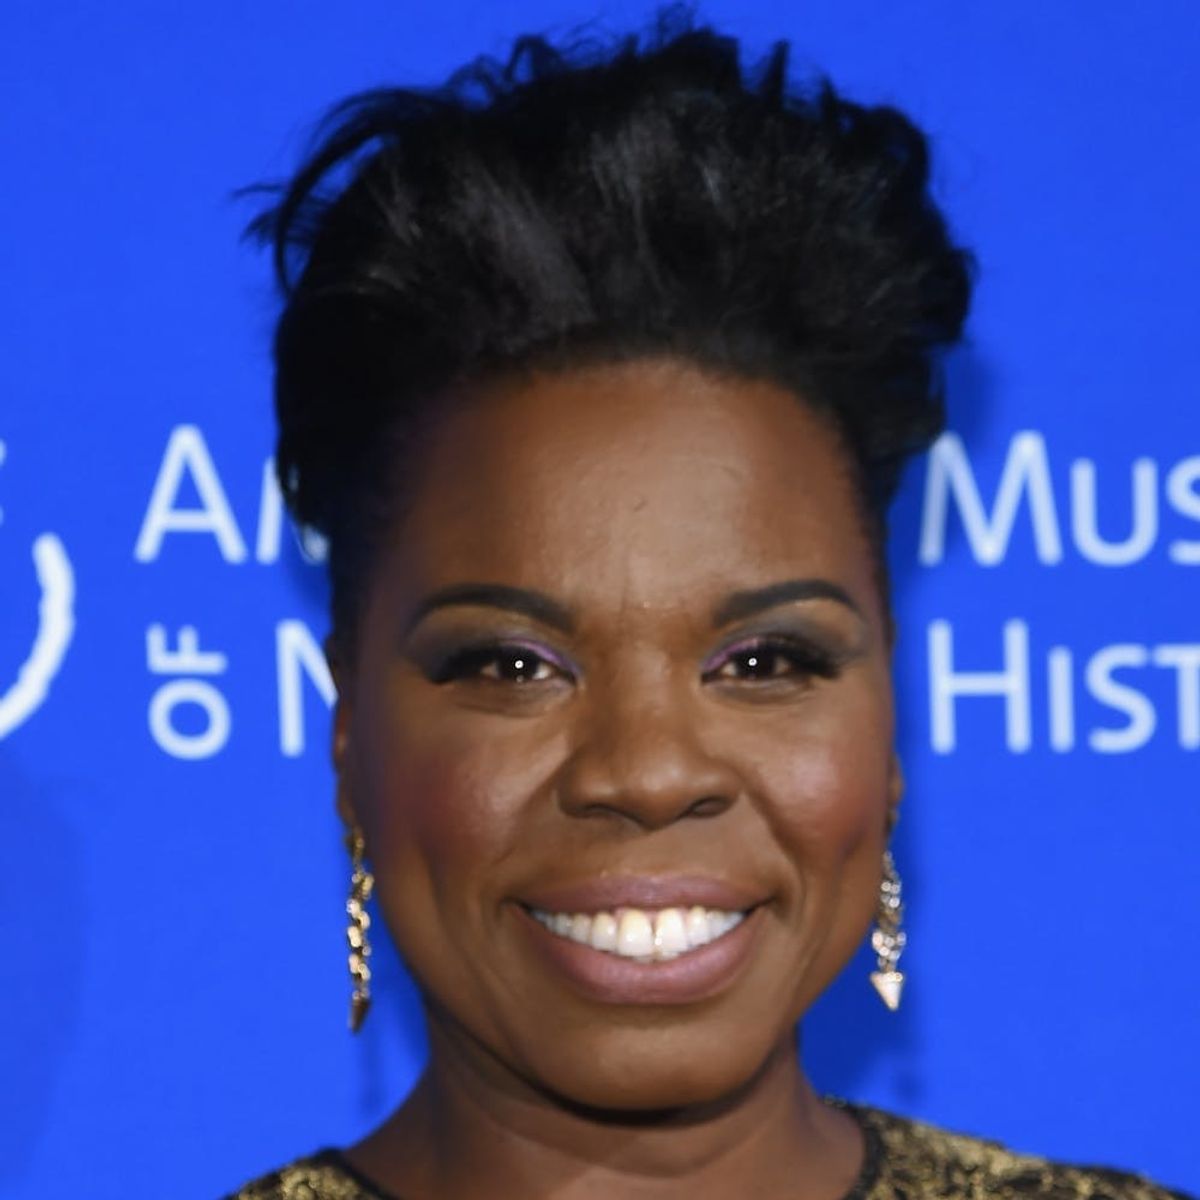 Leslie Jones Is Going for Gold in Olympic Commentary With Her Hilarious Tweets